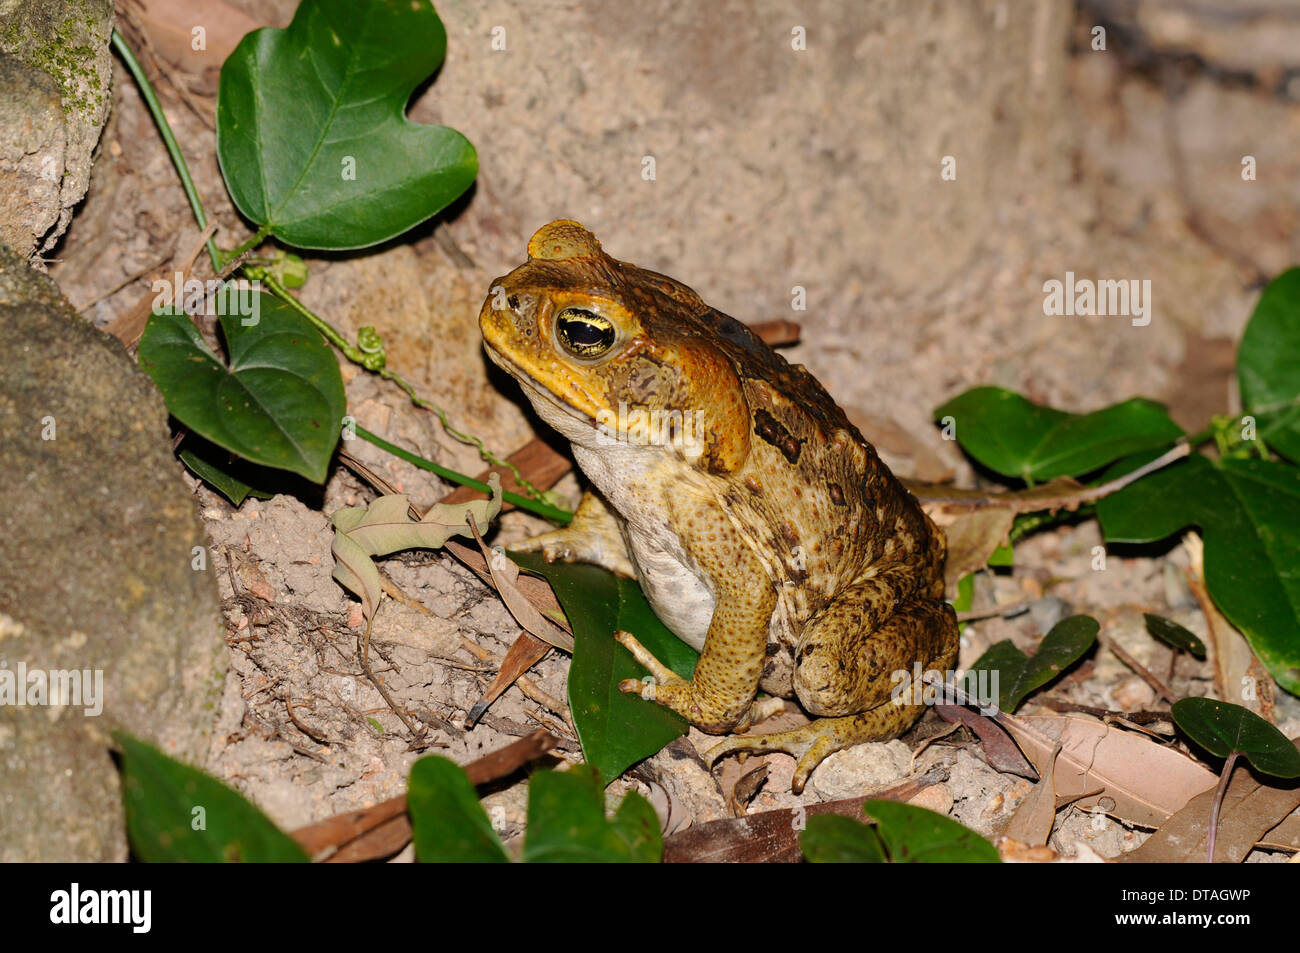 Cane toad (Rhinella marina). A serious pest in many parts of Australia, where it is an invasive species. Stock Photo